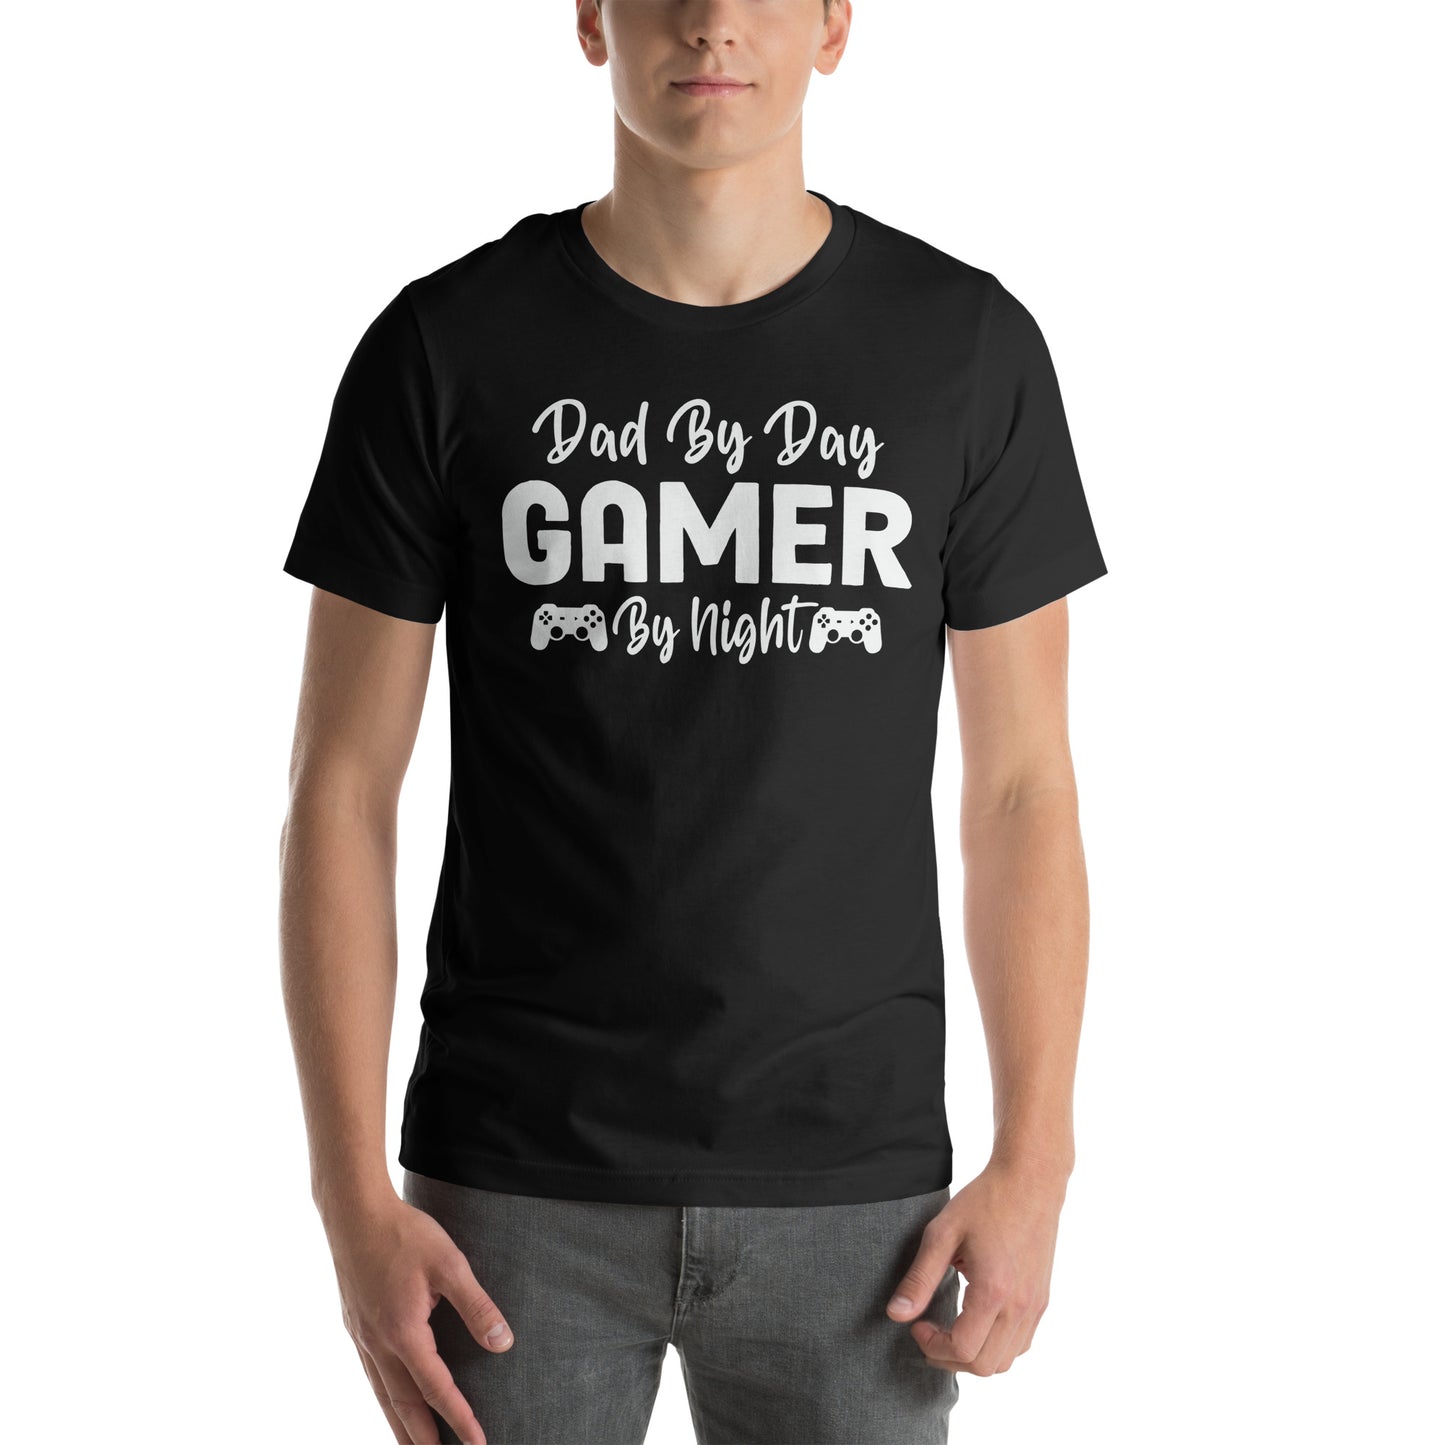 Dad by Day Gamer by Night | Casual Men's Tee | Gamer Dad Shirt